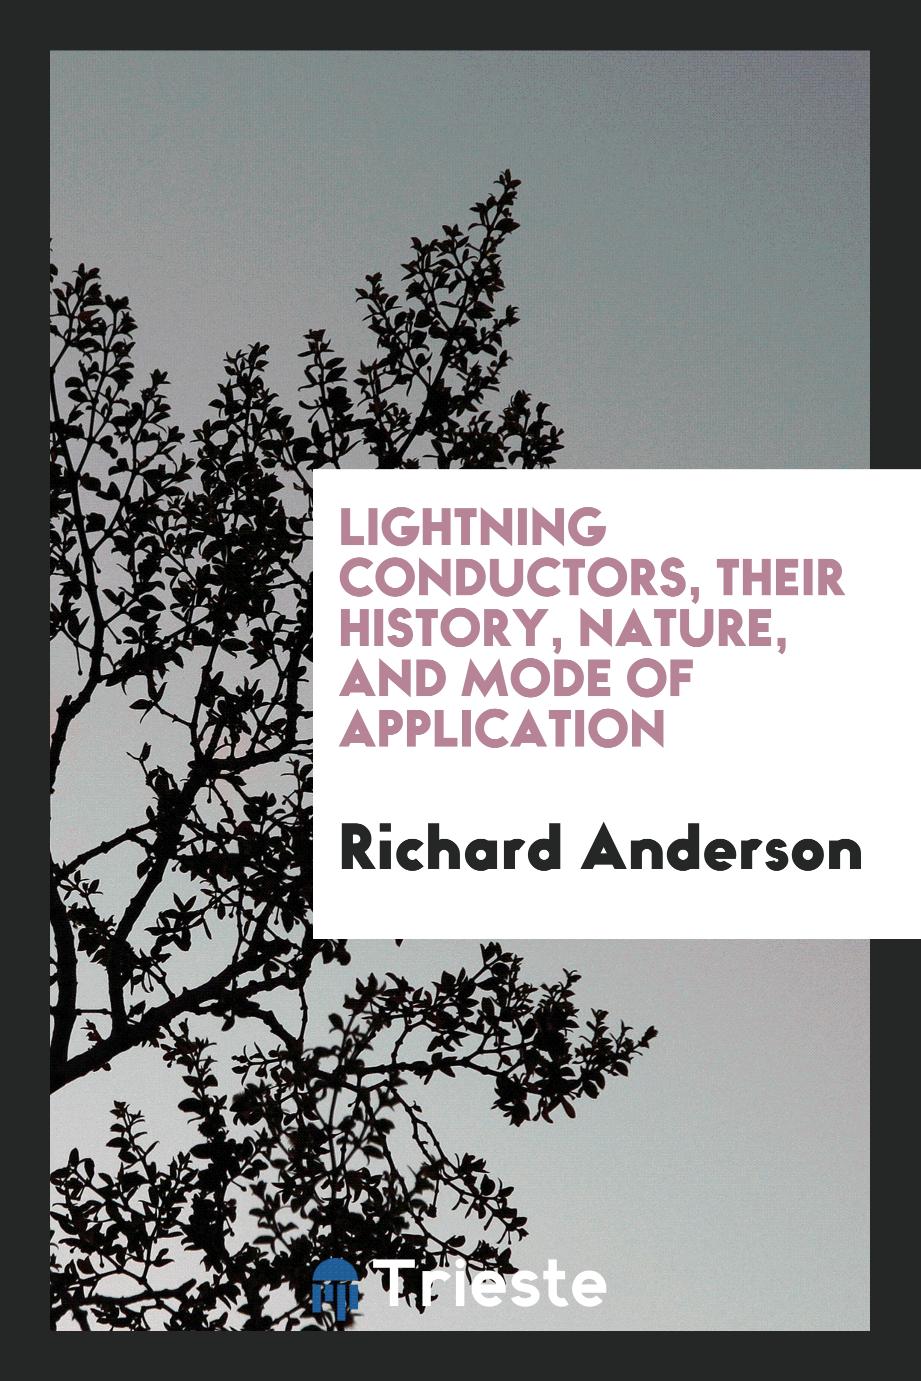 Lightning conductors, their history, nature, and mode of application